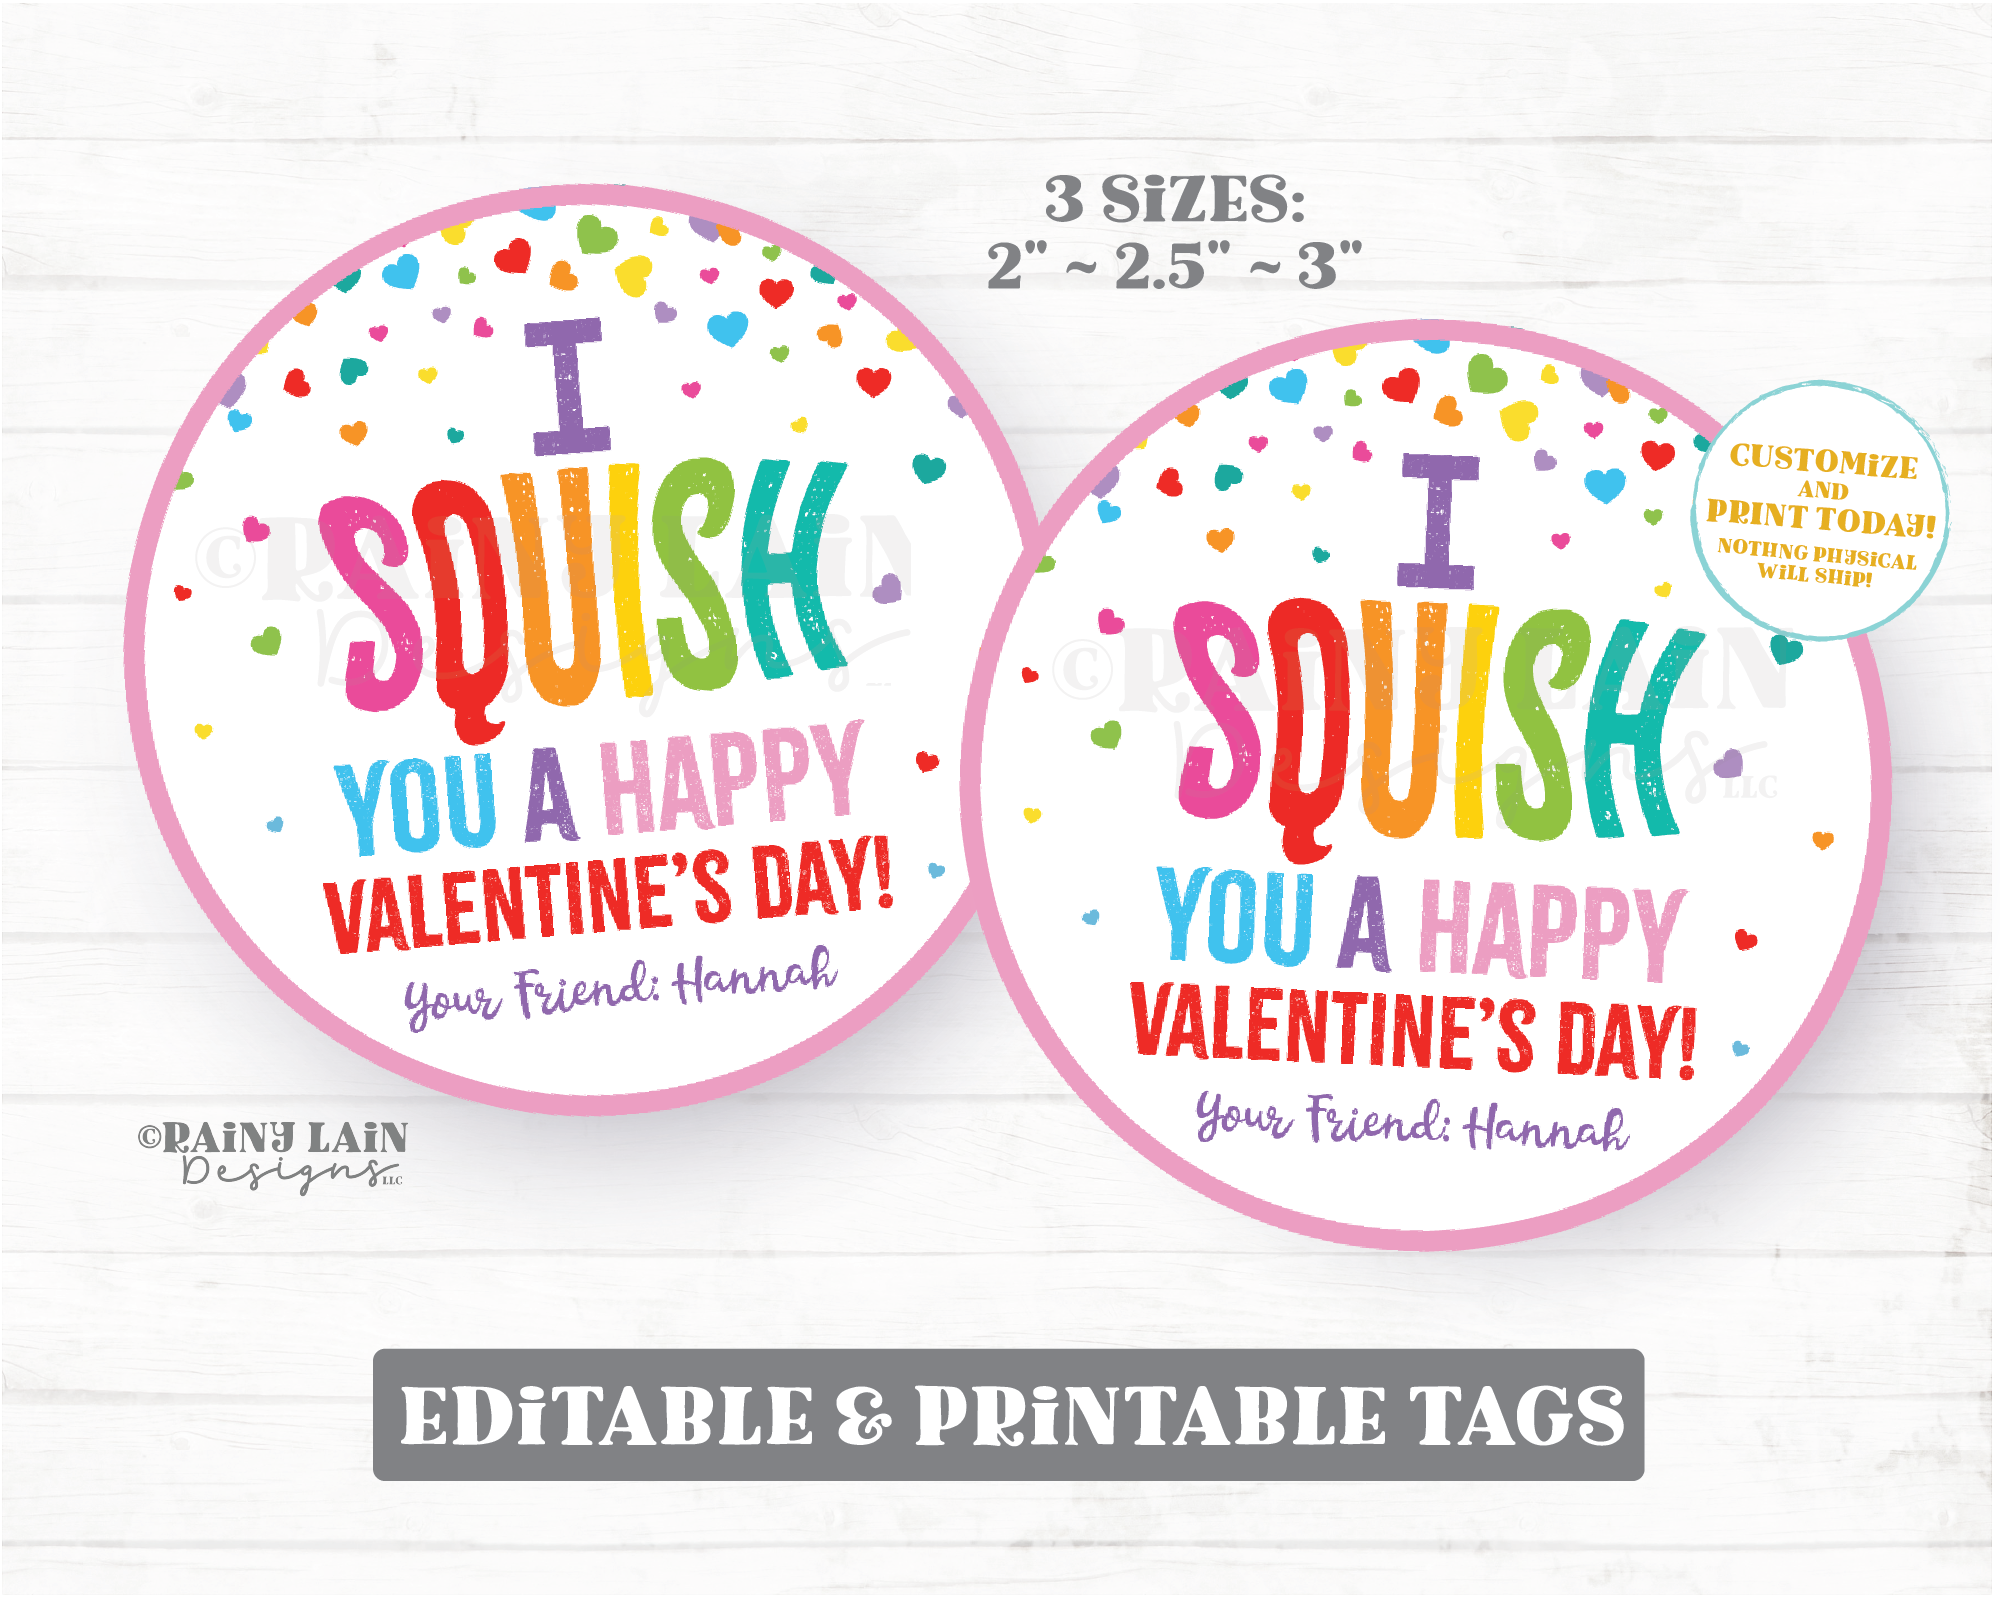 I squish you a happy Valentine's day Squishy Toy Squishee Squishies Valentine Squeeze Preschool Classroom Printable Kids Non-Candy Valentine